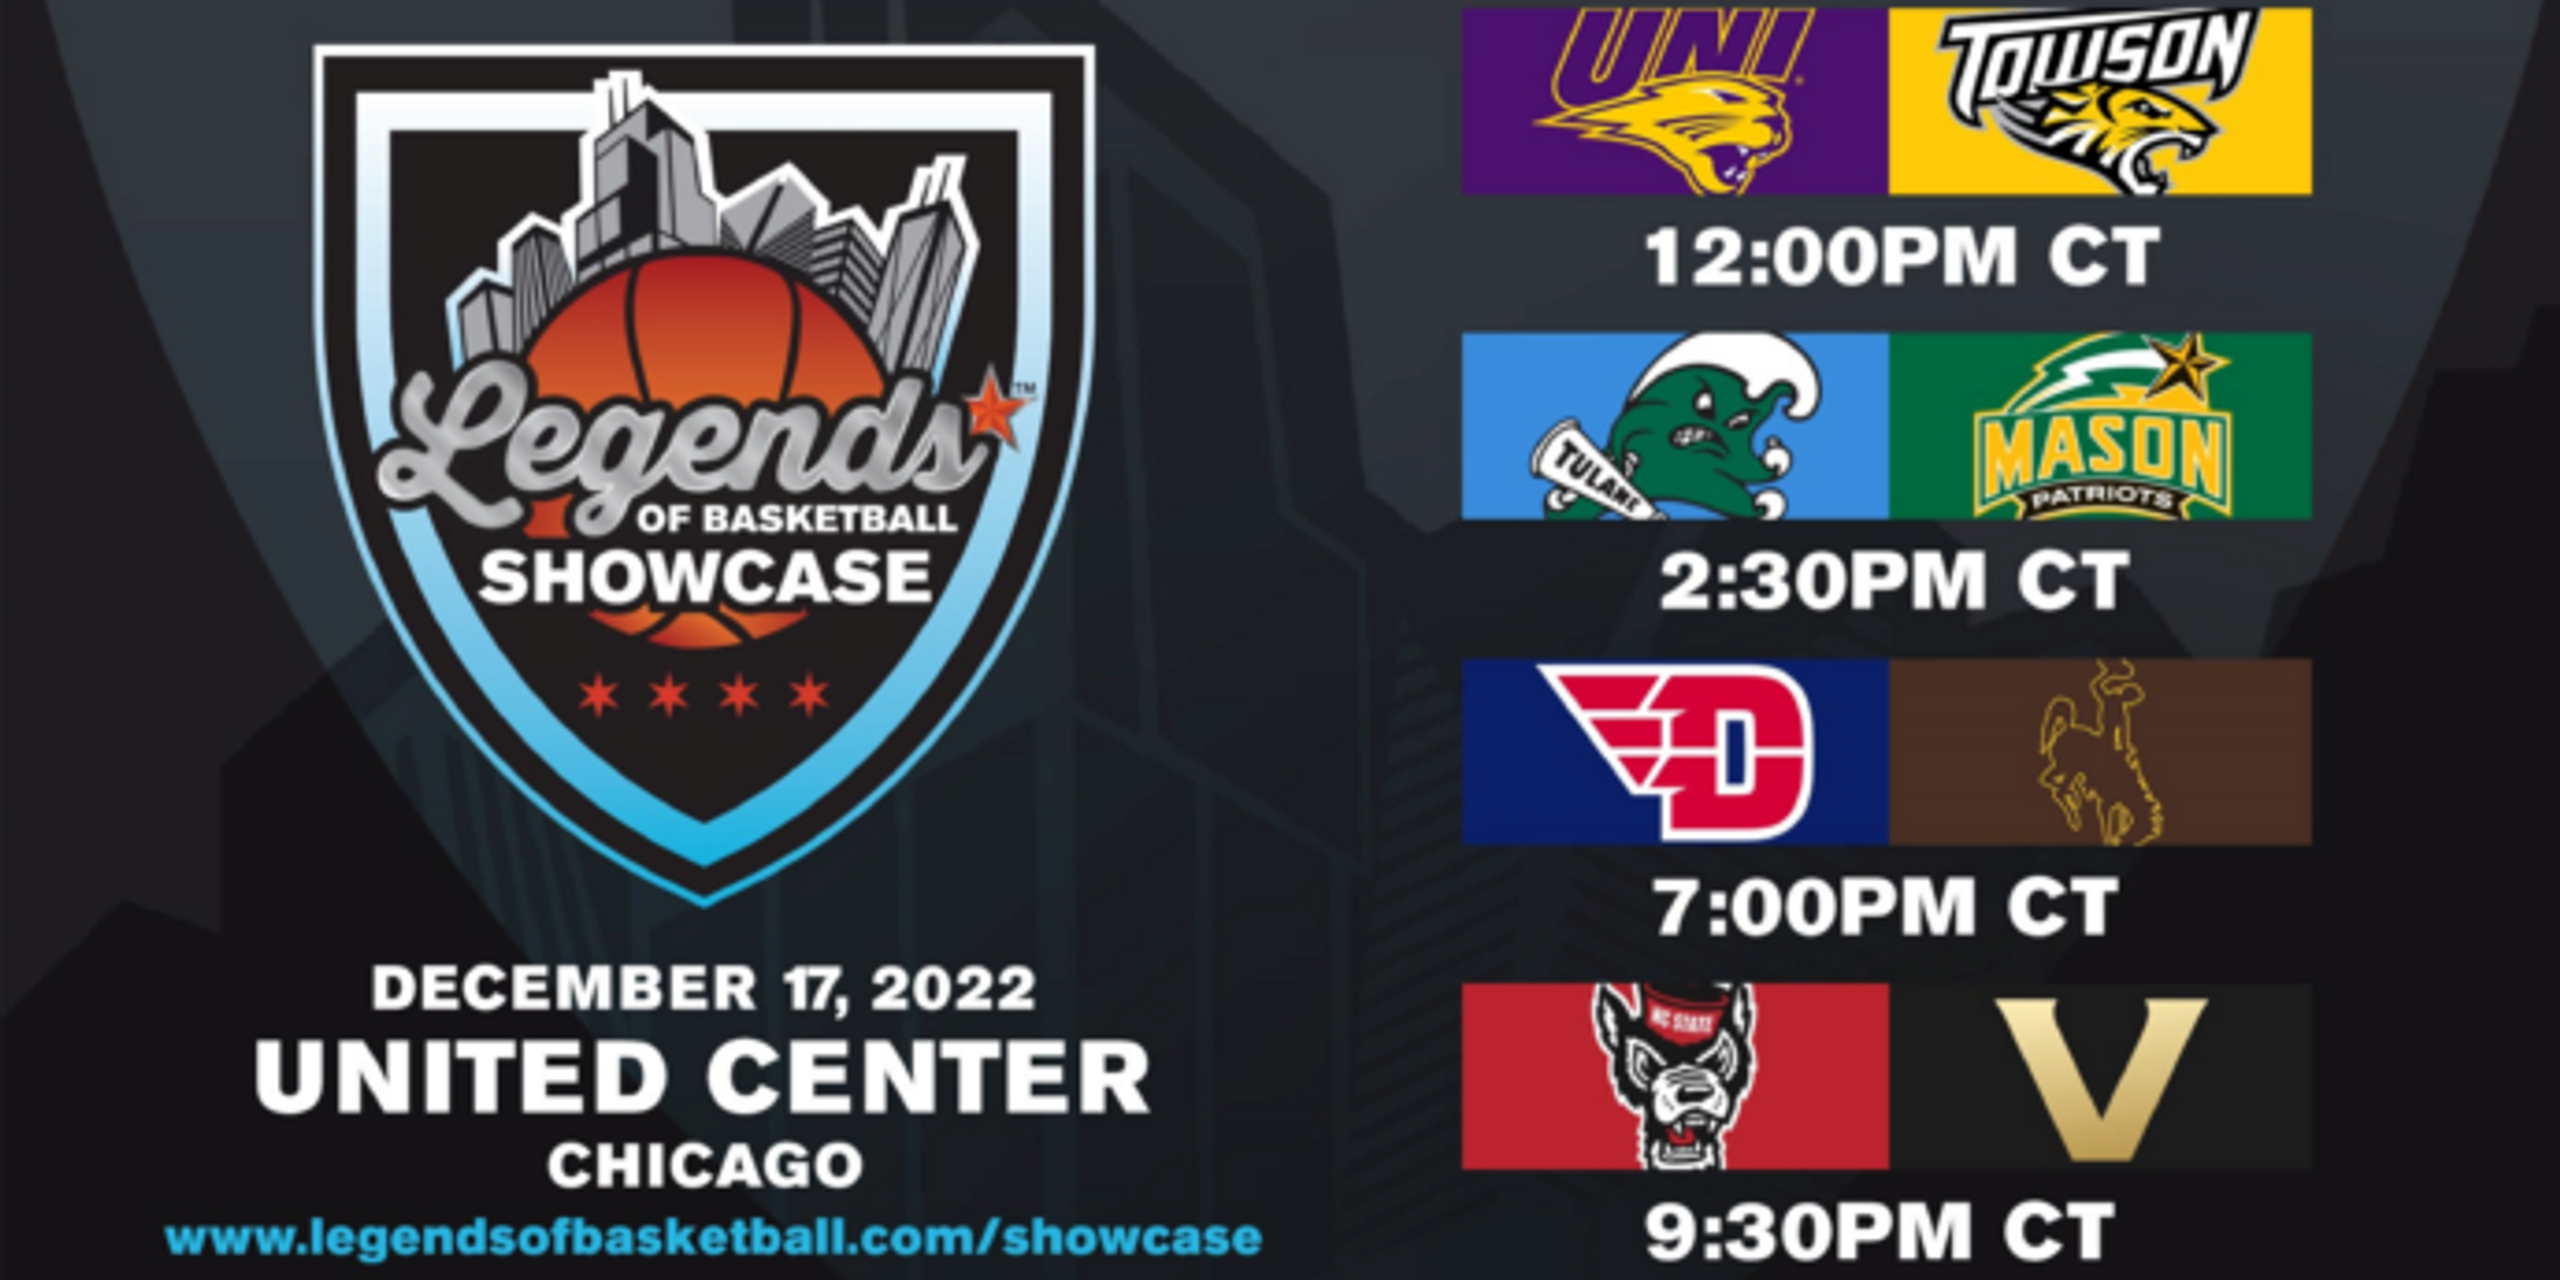 Inaugural Legends of Basketball Showcase set for Dec. 17 in Chicago